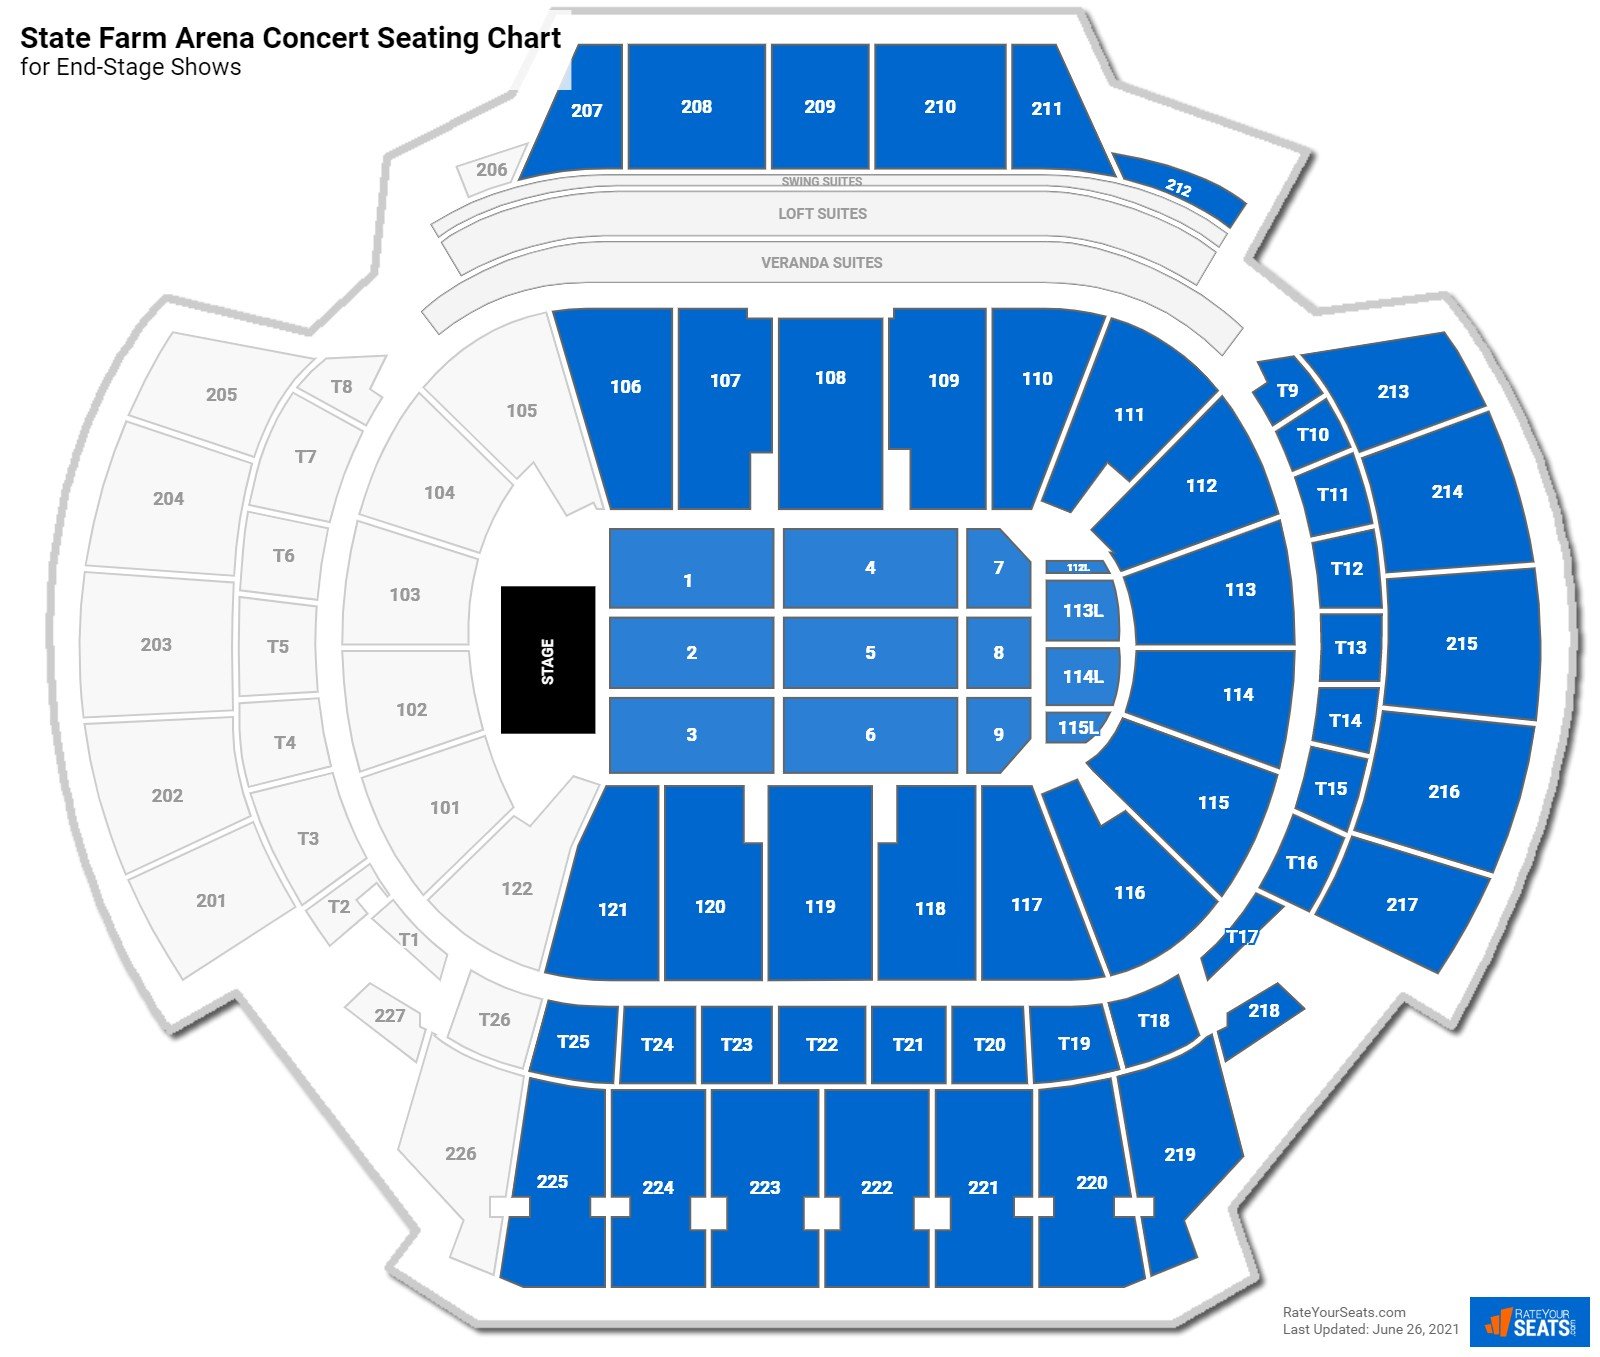 State Farm Arena Seating Chart + Rows, Seat Numbers and Club Seats